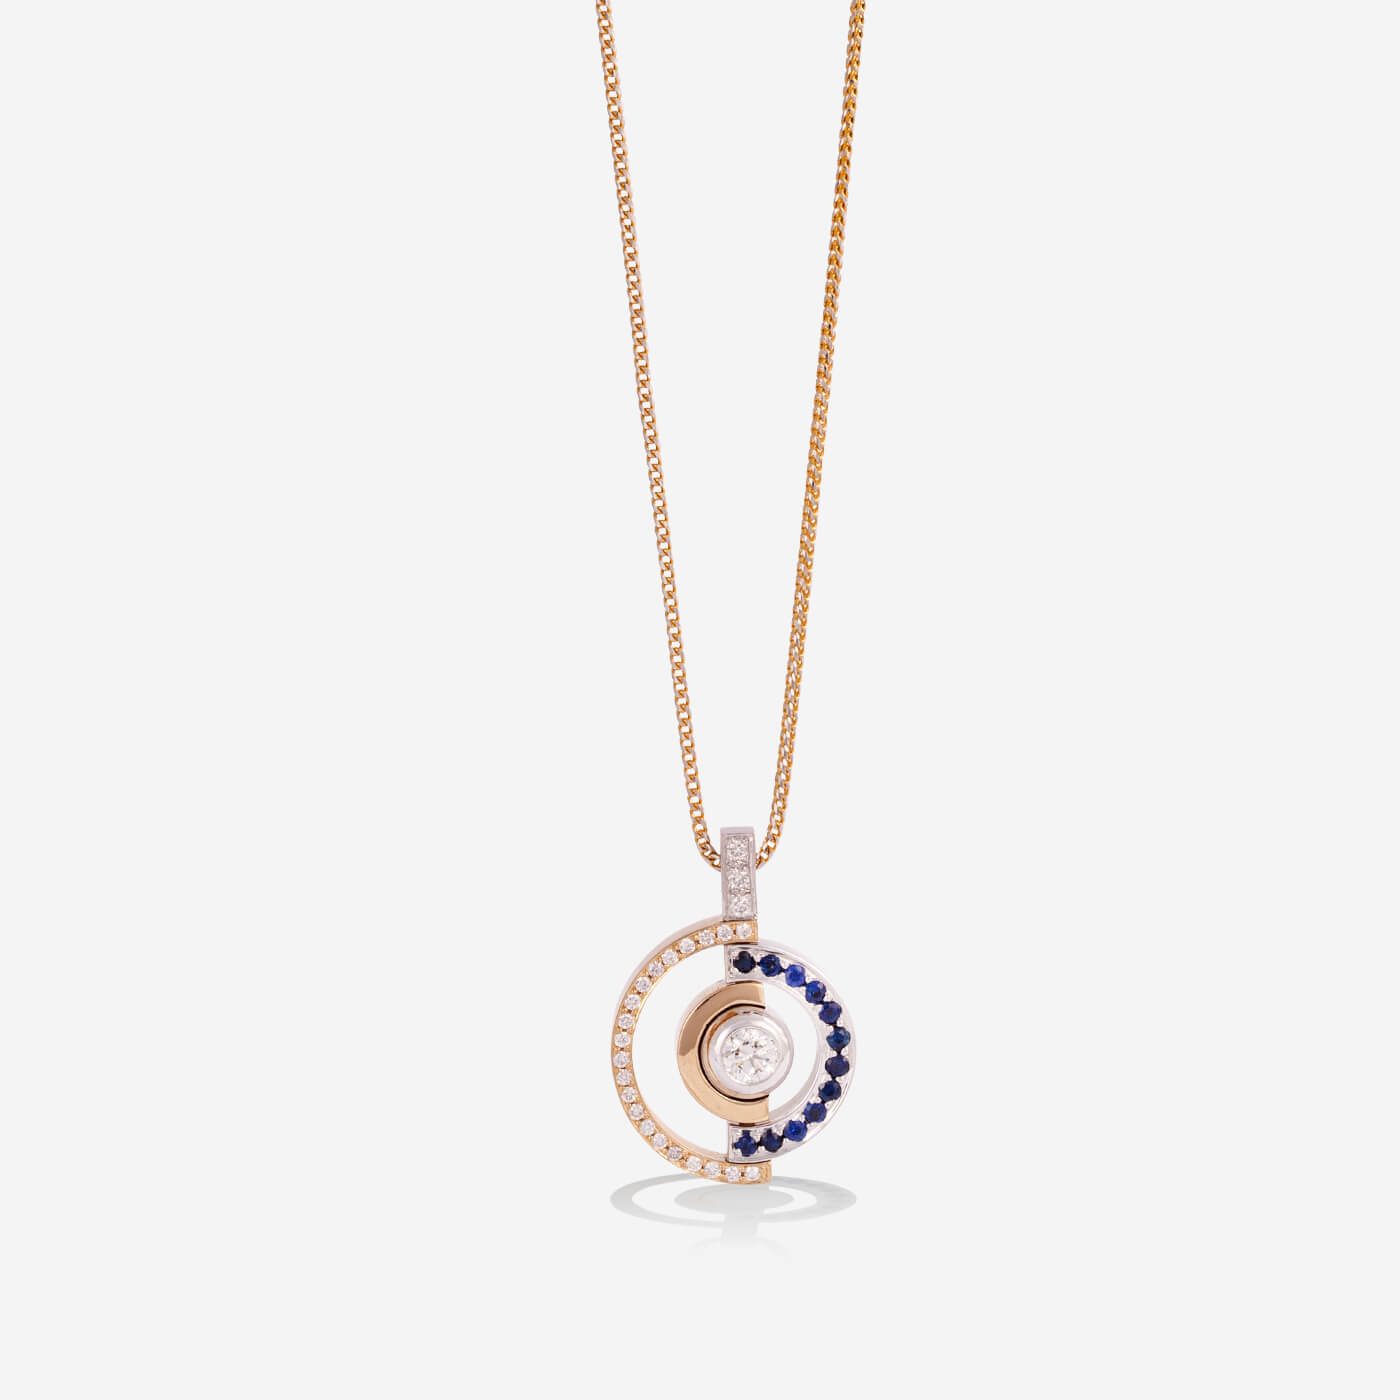 Multi Functional Full & Half Moon Yellow Gold Sapphire With Diamonds Necklace - Ref: RG03036